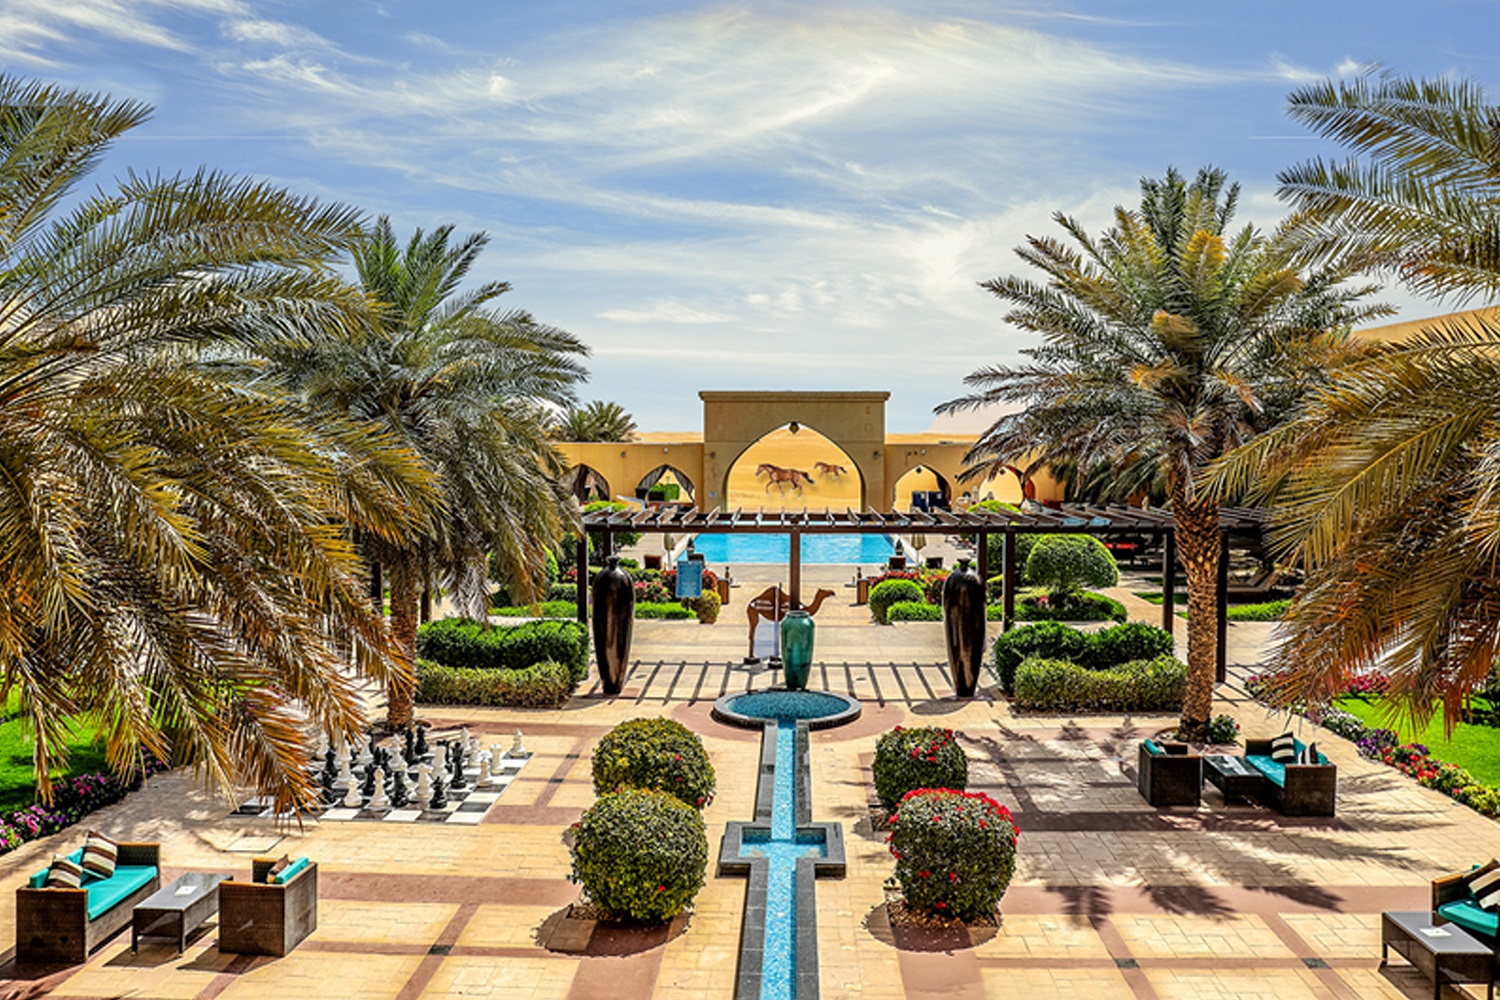 Stay for Free this Summer at Tilal Liwa Hotel